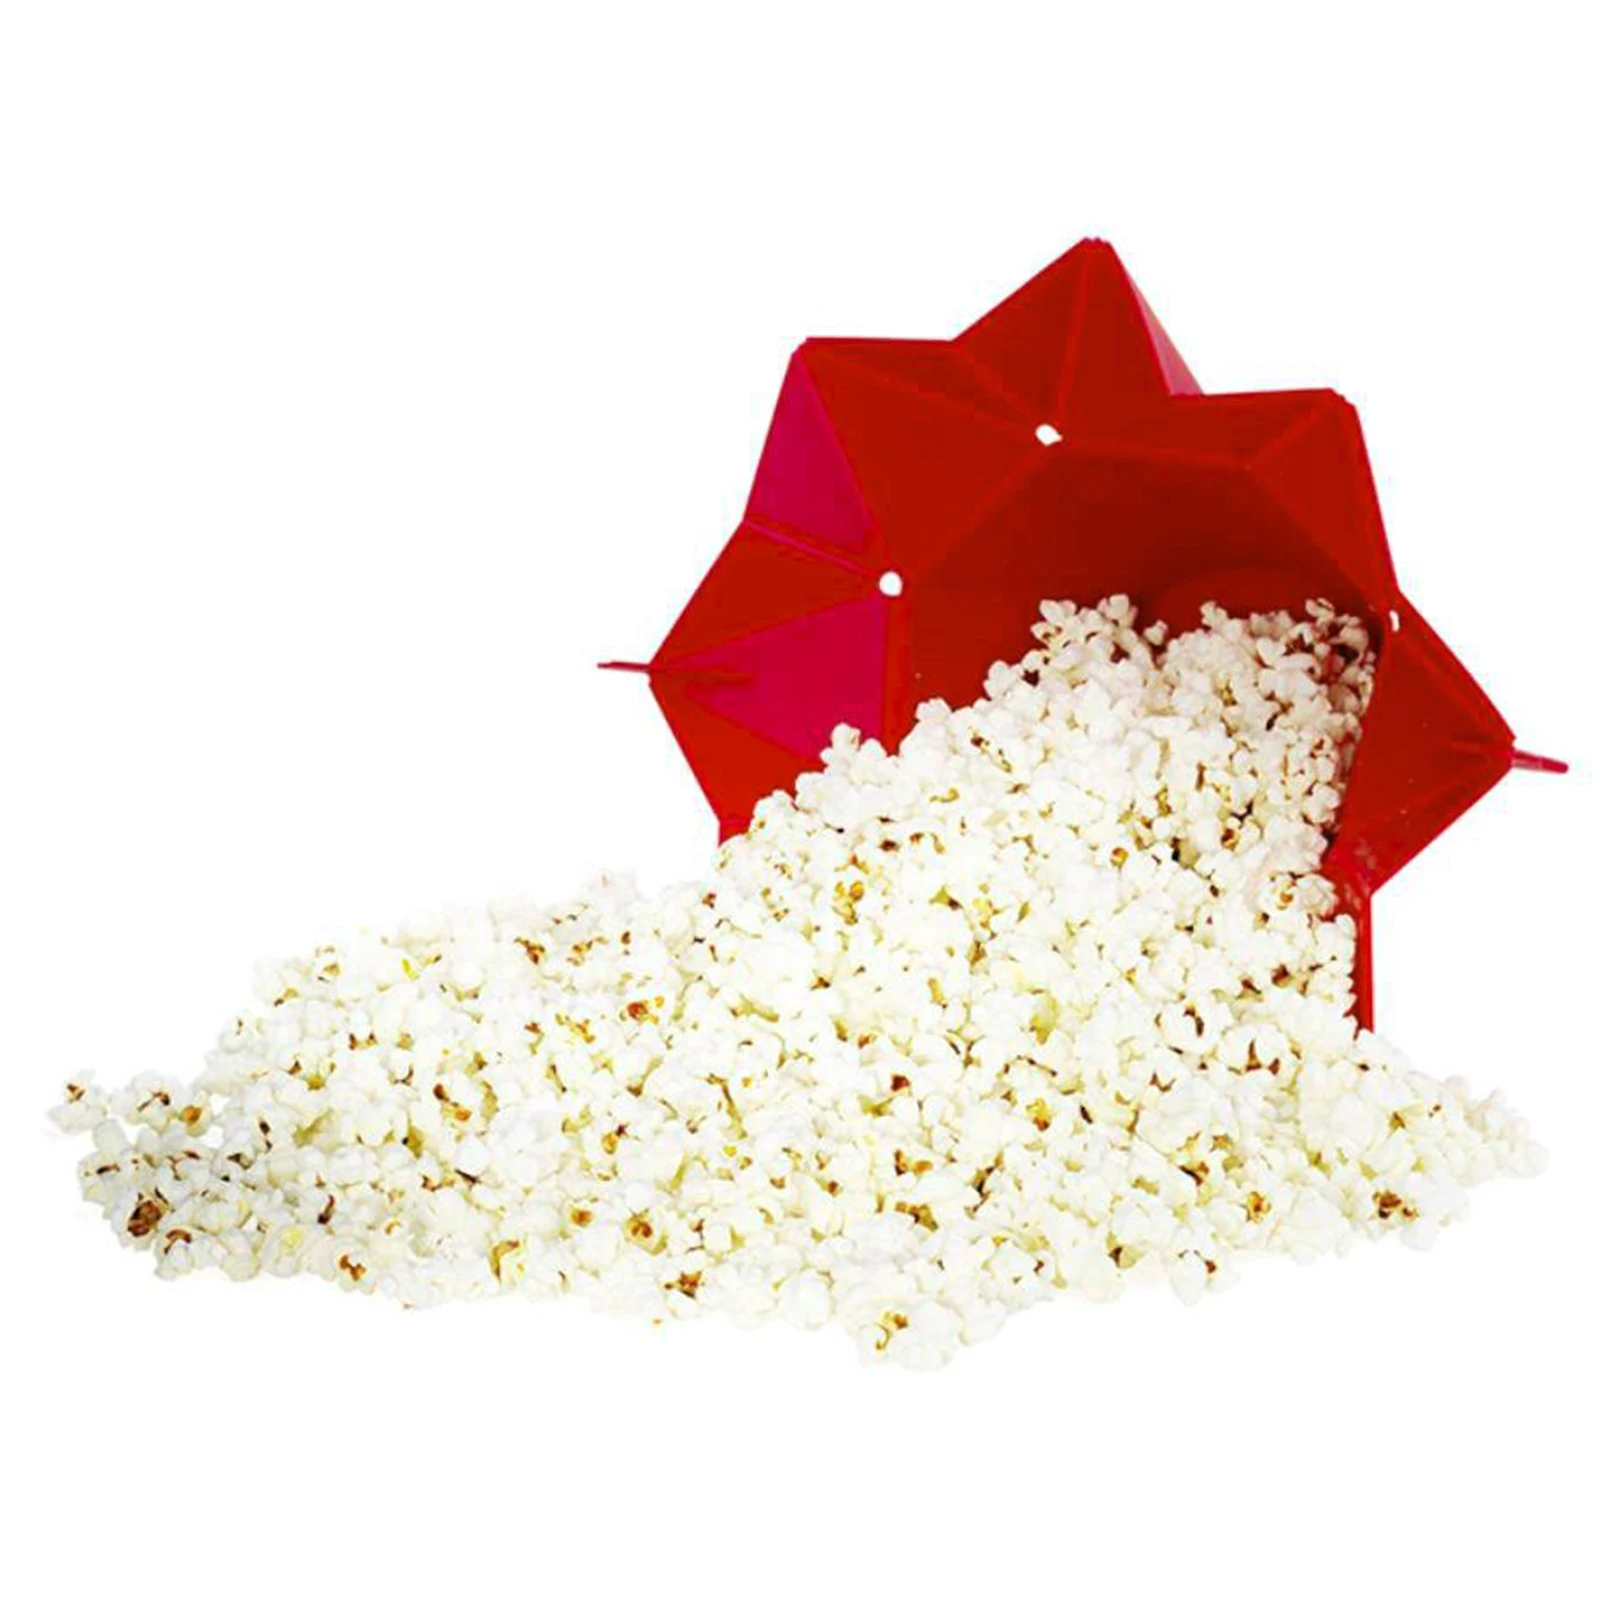 Silicone Microwave Popcorn Maker Folding Bowl Popcorn Bucket Kitchen Cooking Accessory Red Popcorn Bucket Bowl Maker